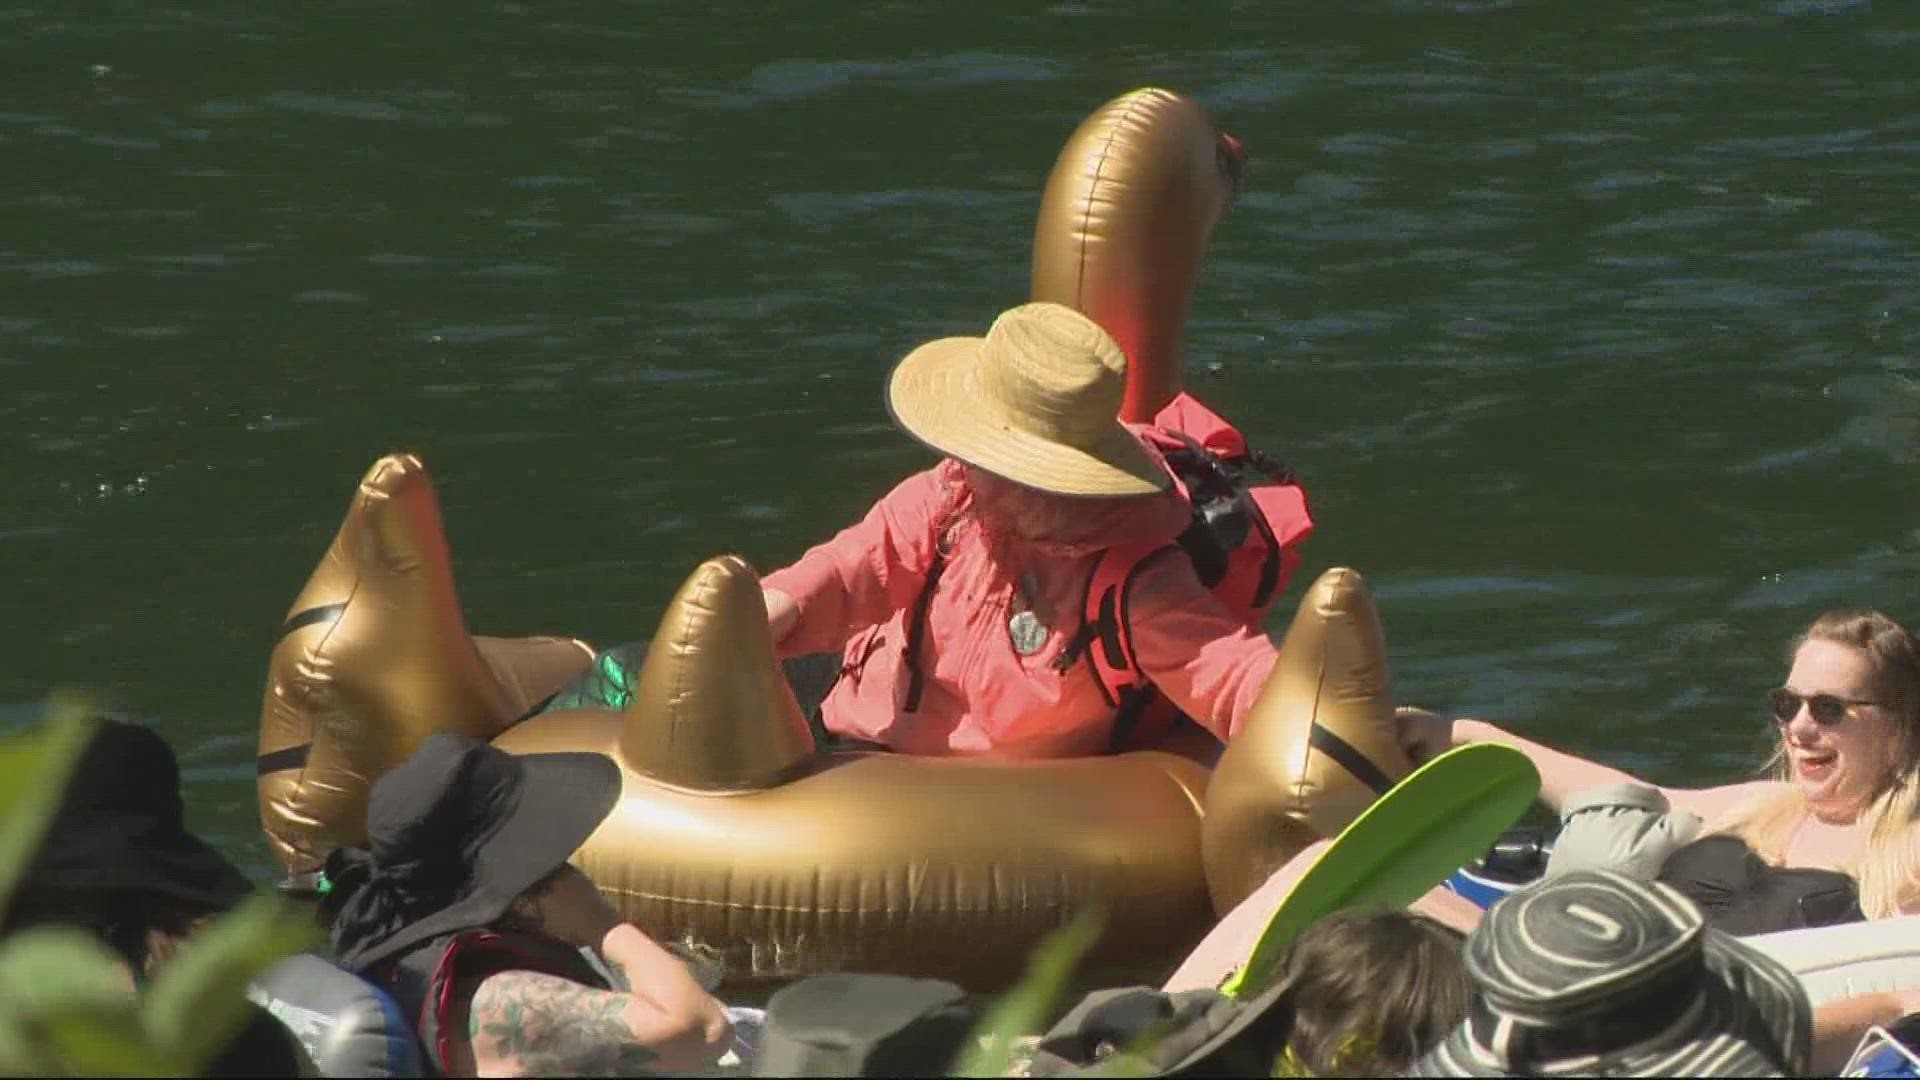 Participants floated down the Clackamas River for 4.5 miles from Barton Park to Carver Park. 
KGW8 YOUTUBE